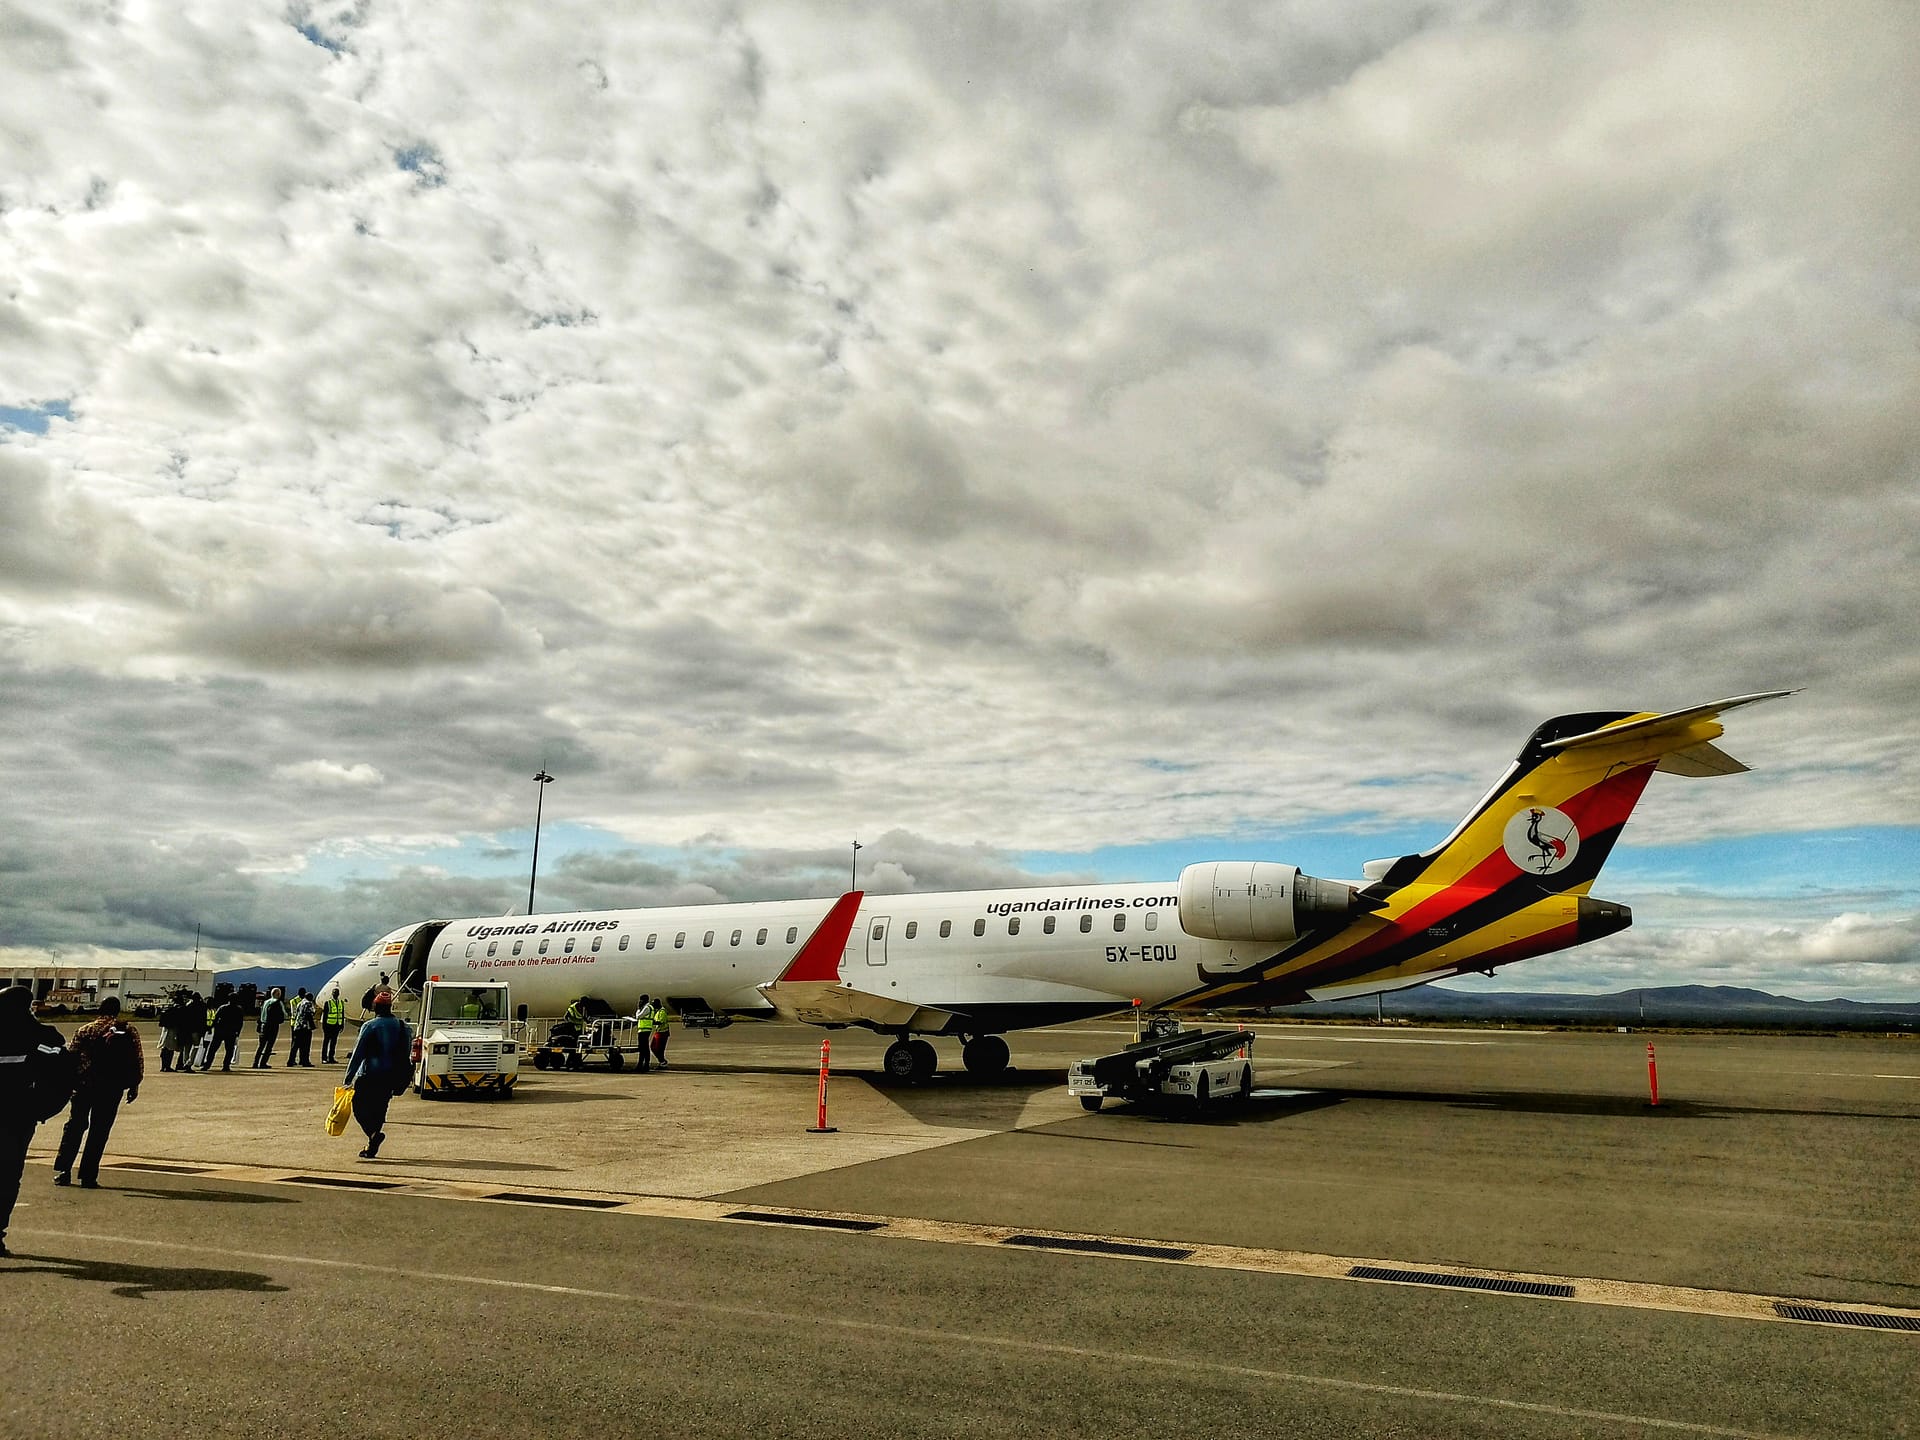 picture showing people walking towards a Uganda Airlines flight